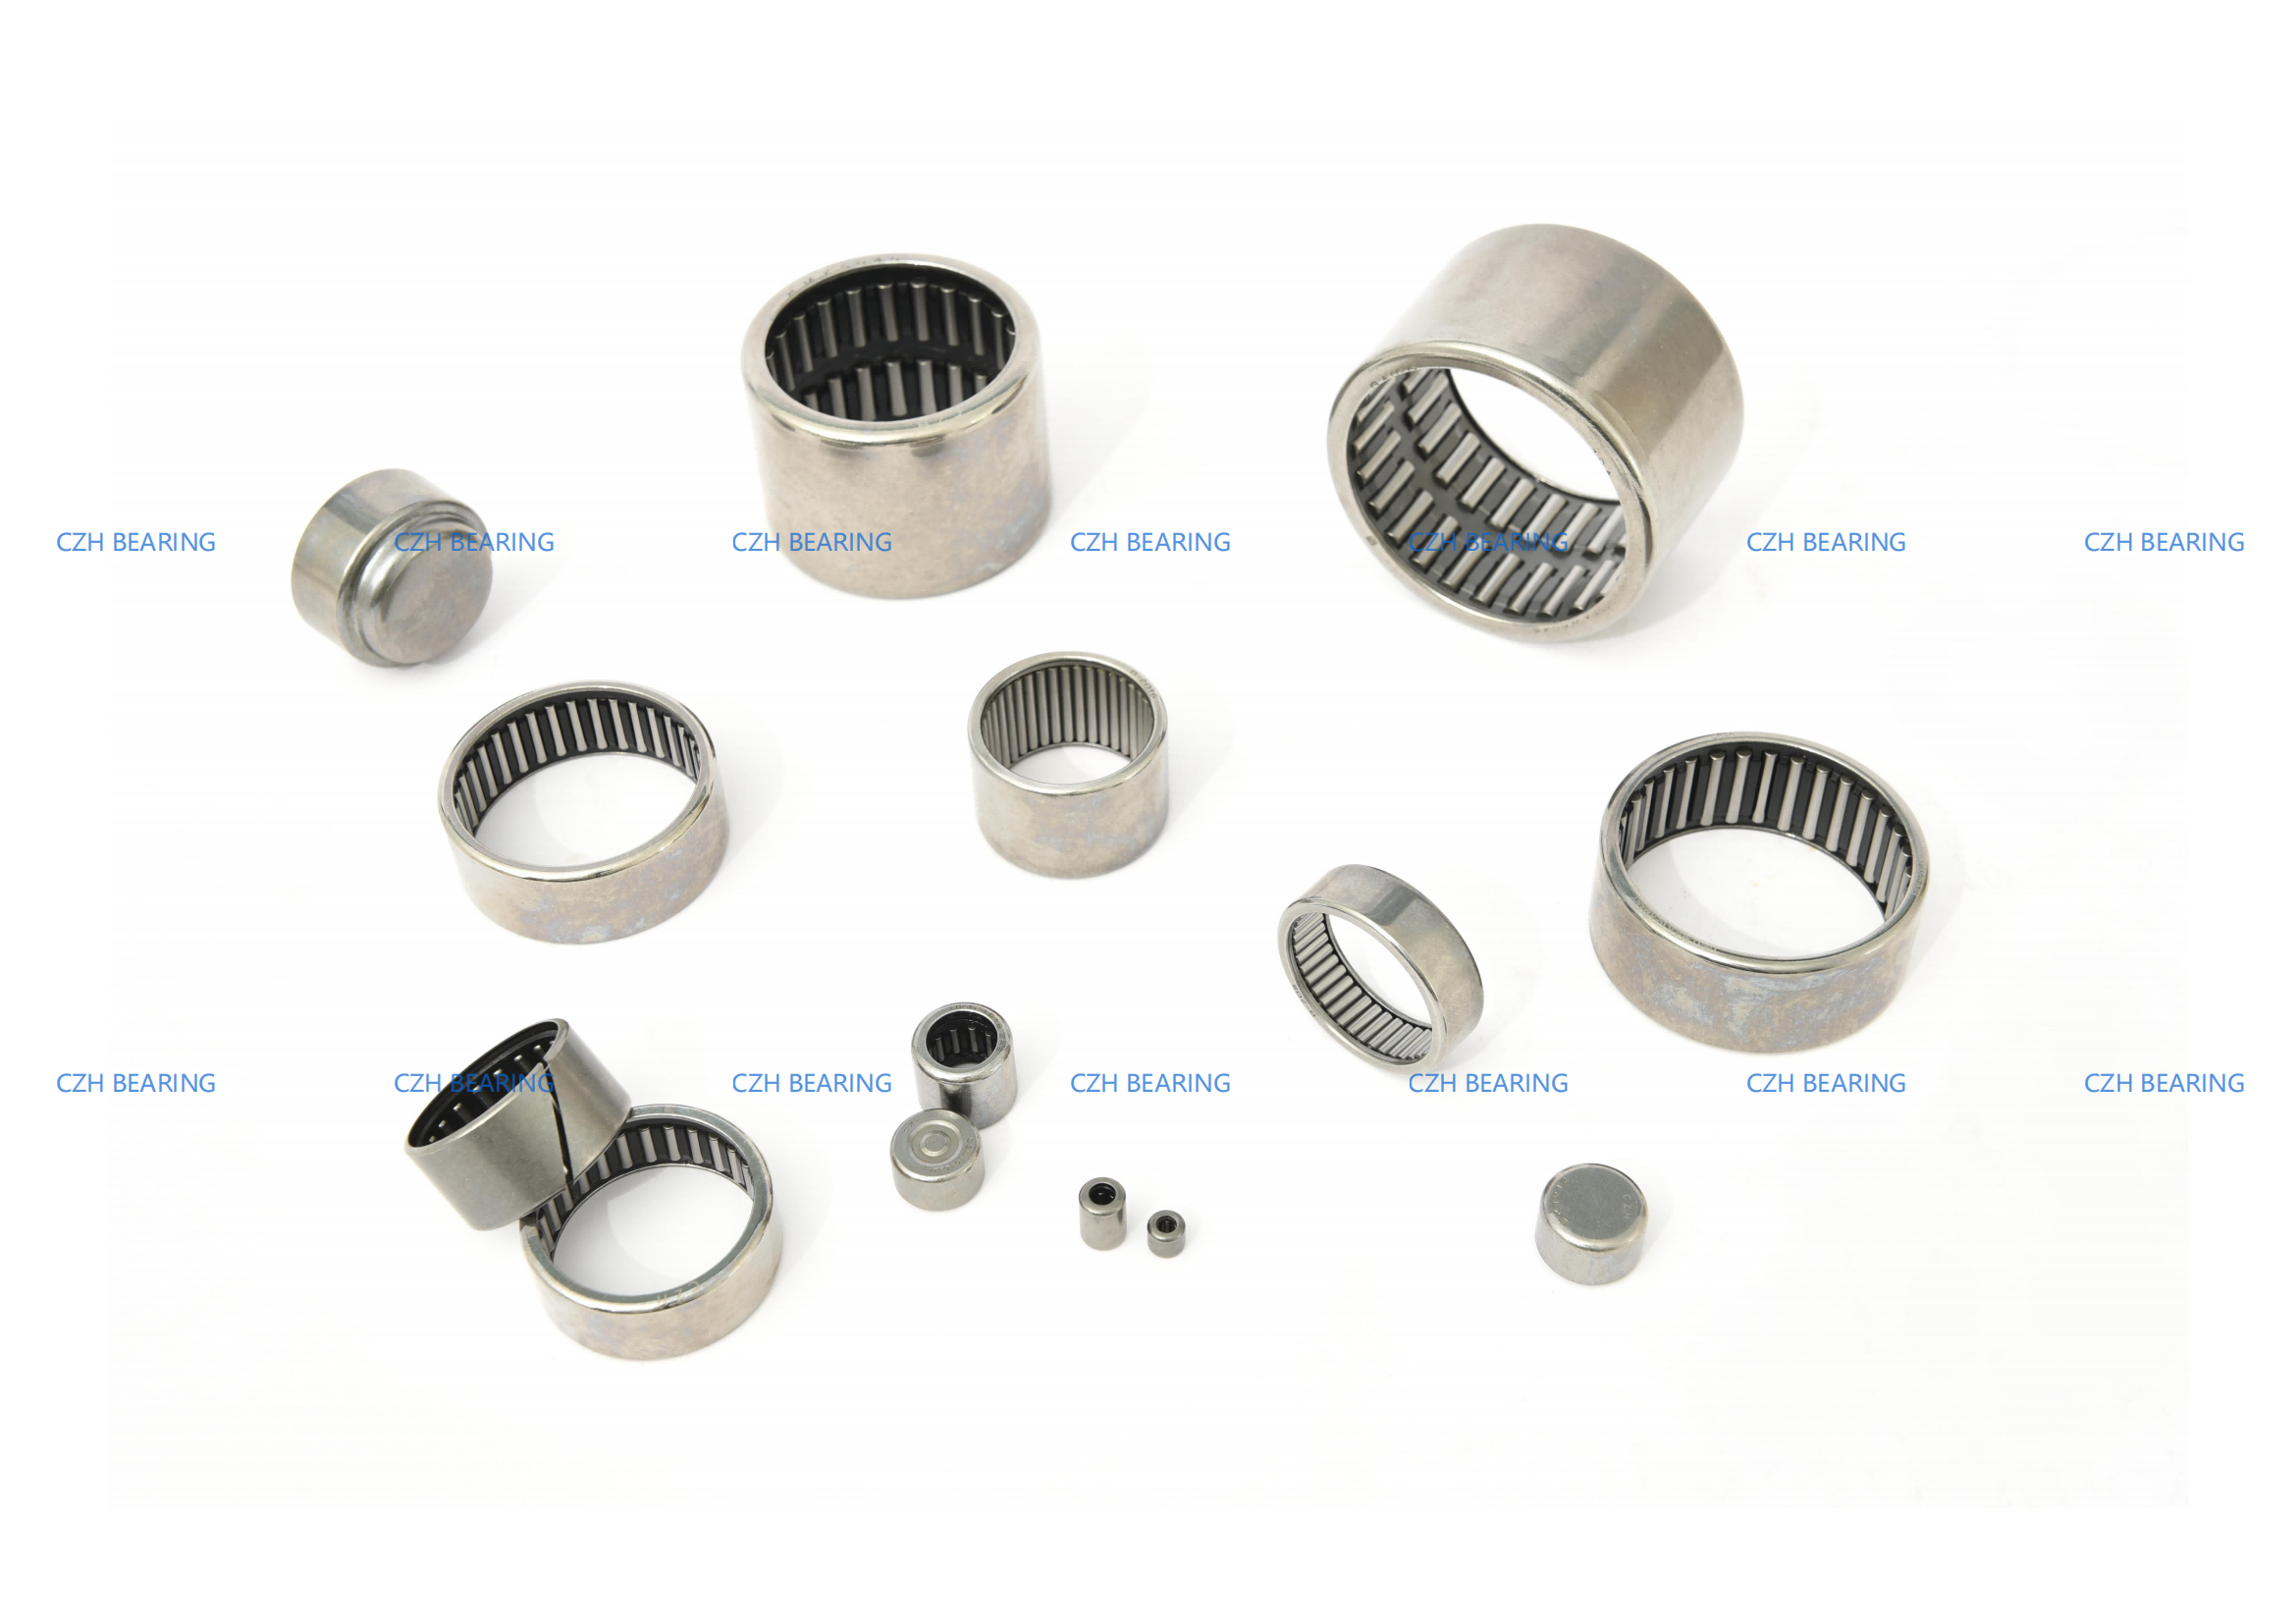 drawn cup needle roller bearings